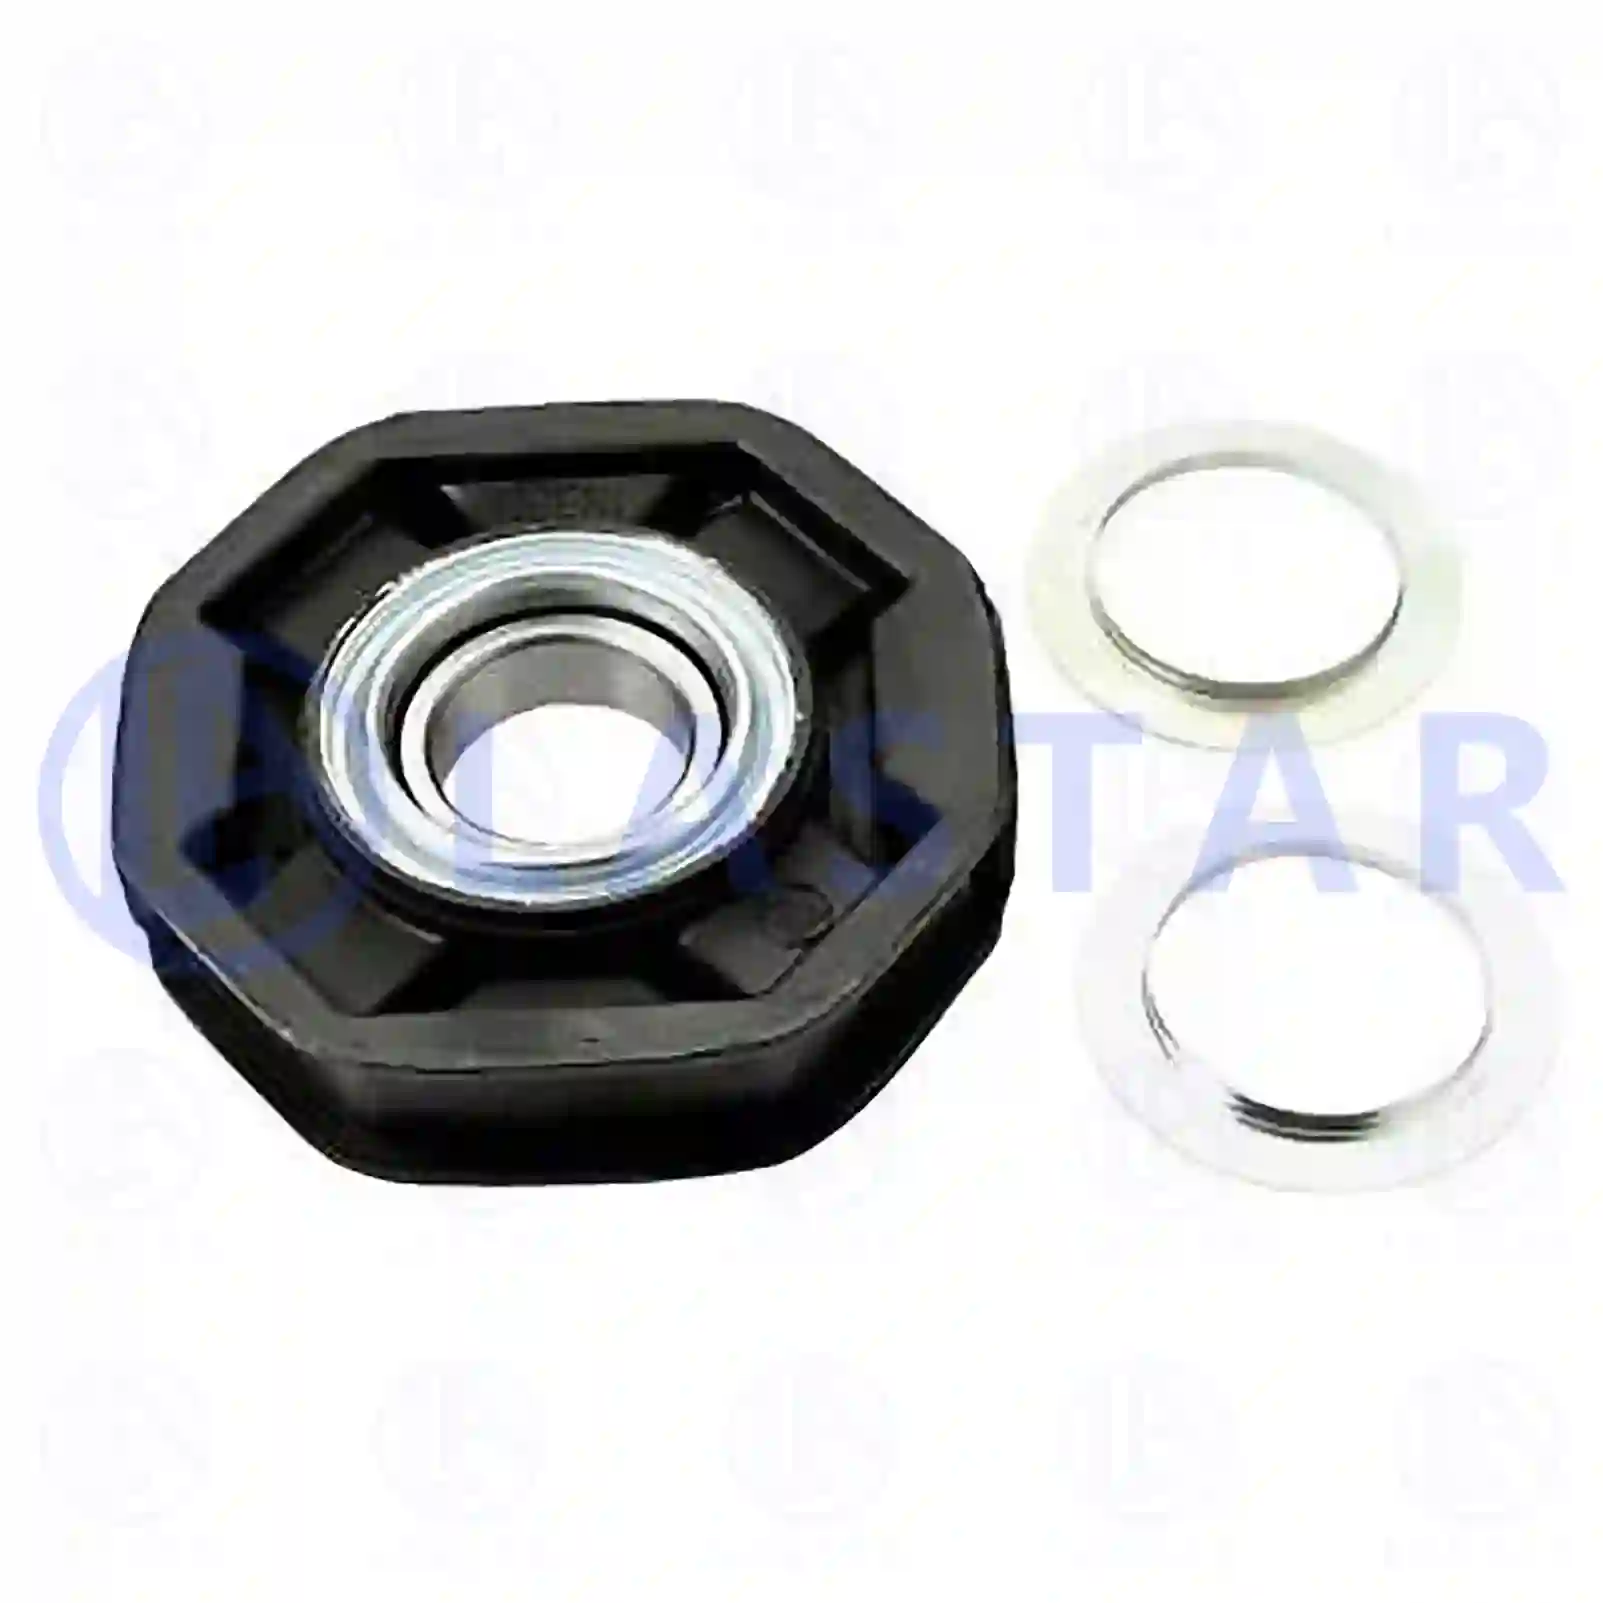 Center bearing, 77734253, 3854100110, 3854100122, 3854100222, 3854100922, 3854101722, 3855860141 ||  77734253 Lastar Spare Part | Truck Spare Parts, Auotomotive Spare Parts Center bearing, 77734253, 3854100110, 3854100122, 3854100222, 3854100922, 3854101722, 3855860141 ||  77734253 Lastar Spare Part | Truck Spare Parts, Auotomotive Spare Parts